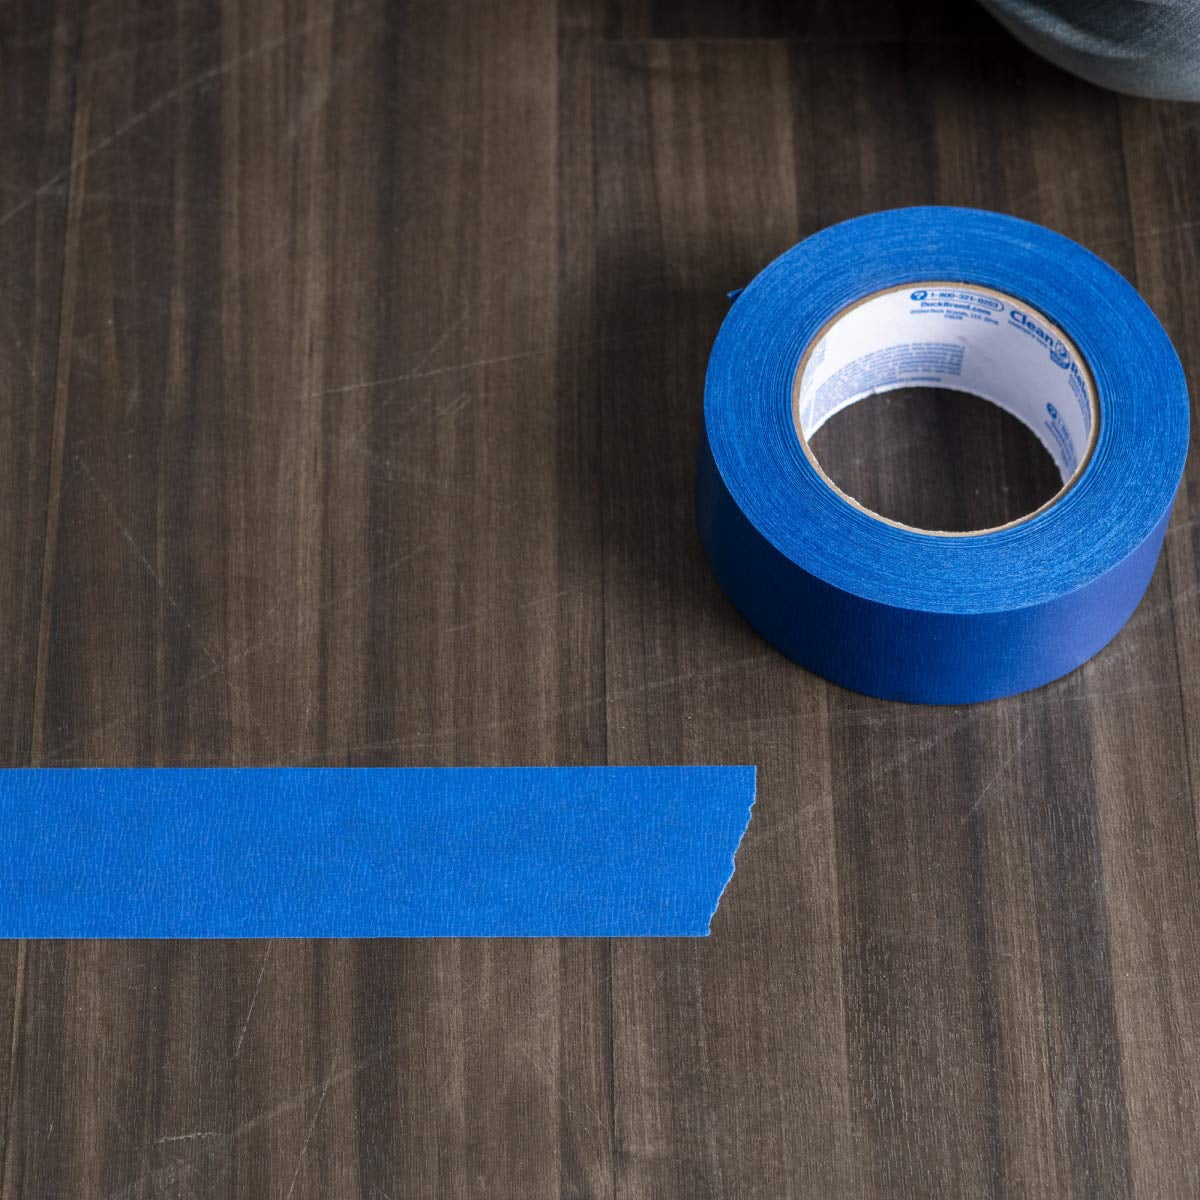 Master Painter 99641 Masking Tape, 1.41 In. x 60 Yd. - Quantity 24